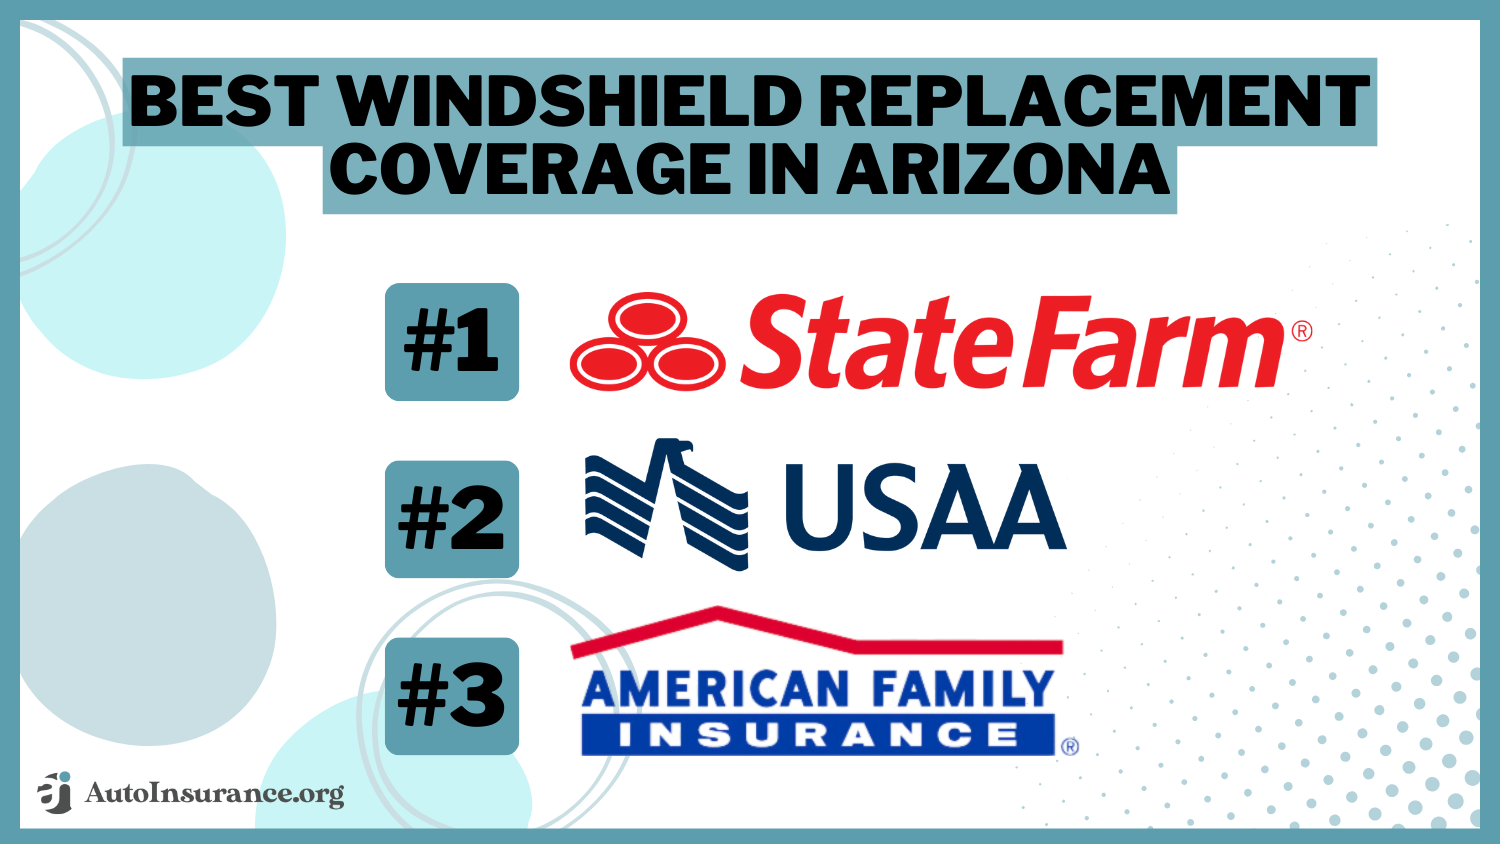 best windshield replacement coverage in Arizona: State Farm, USAA, American Family